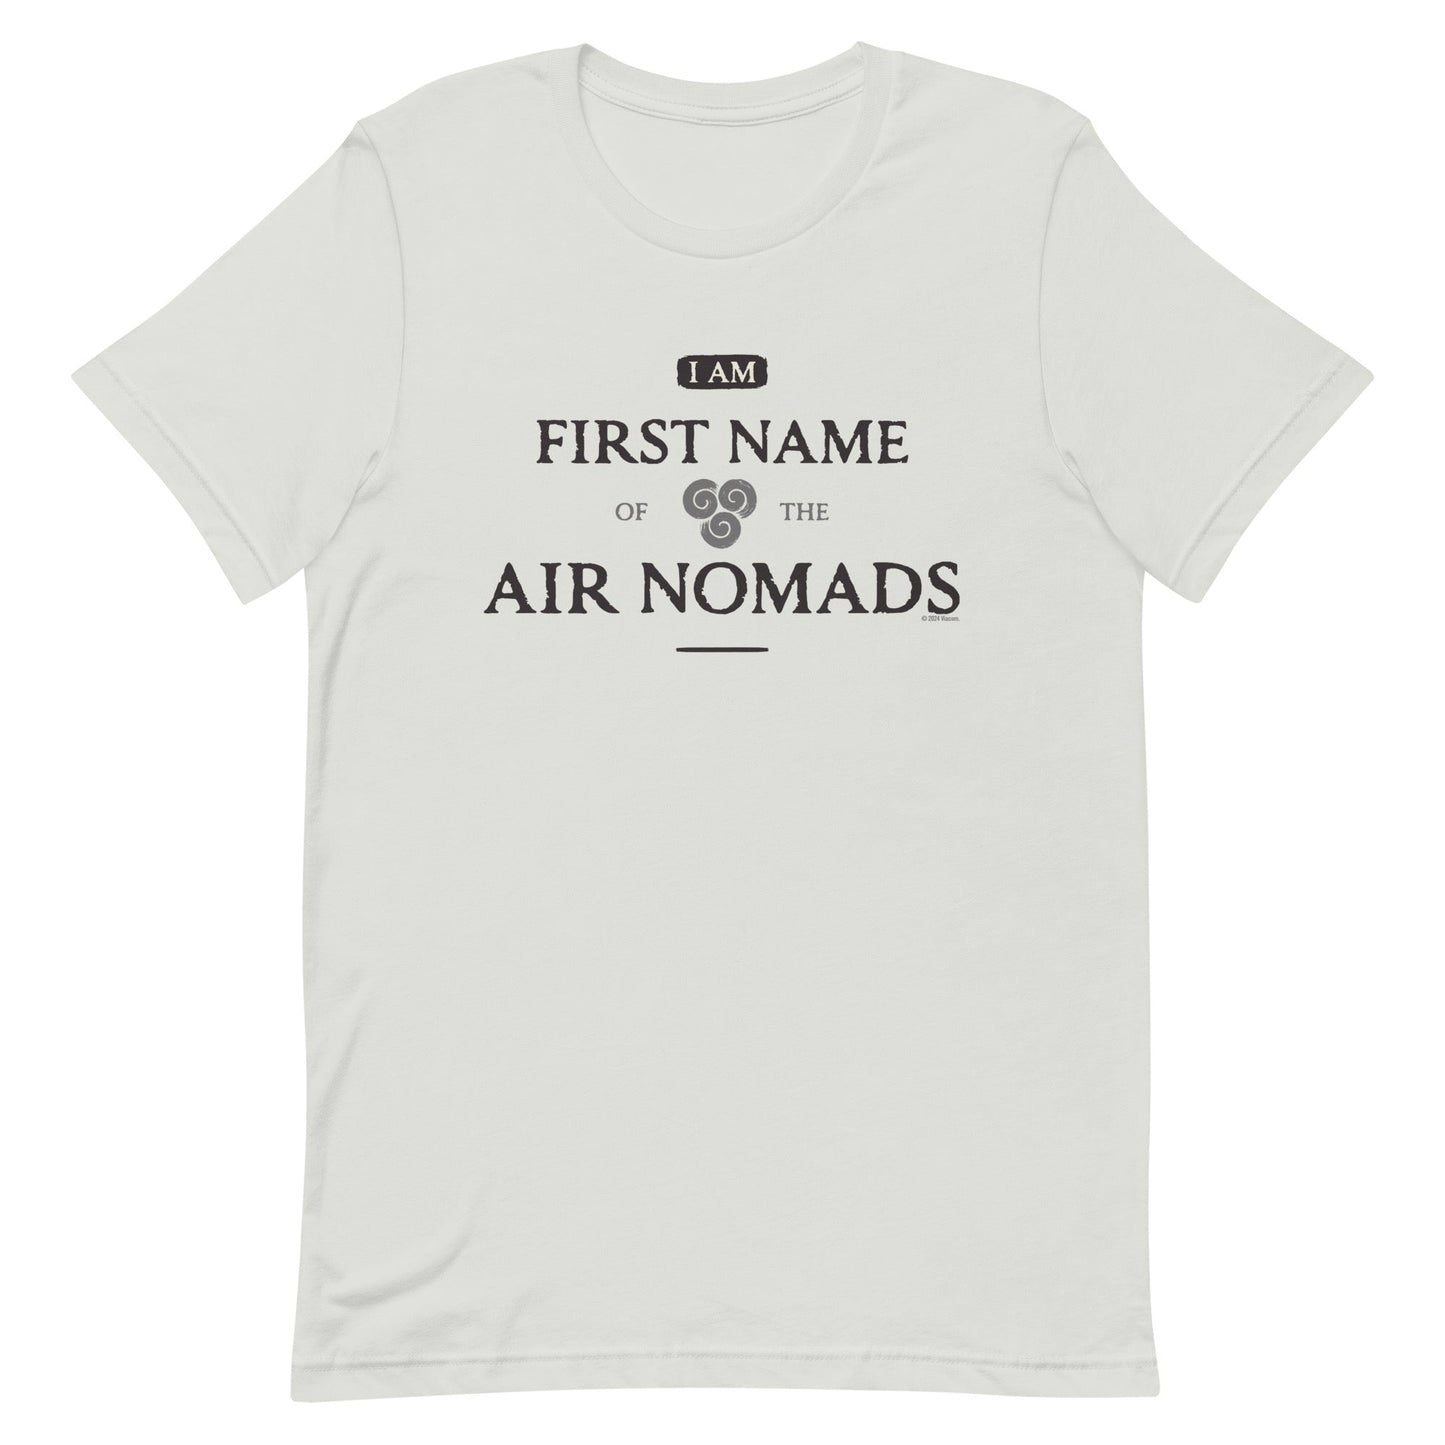 Avatar the Last Airbender Air Nomads Personalized T - Shirt - Paramount Shop